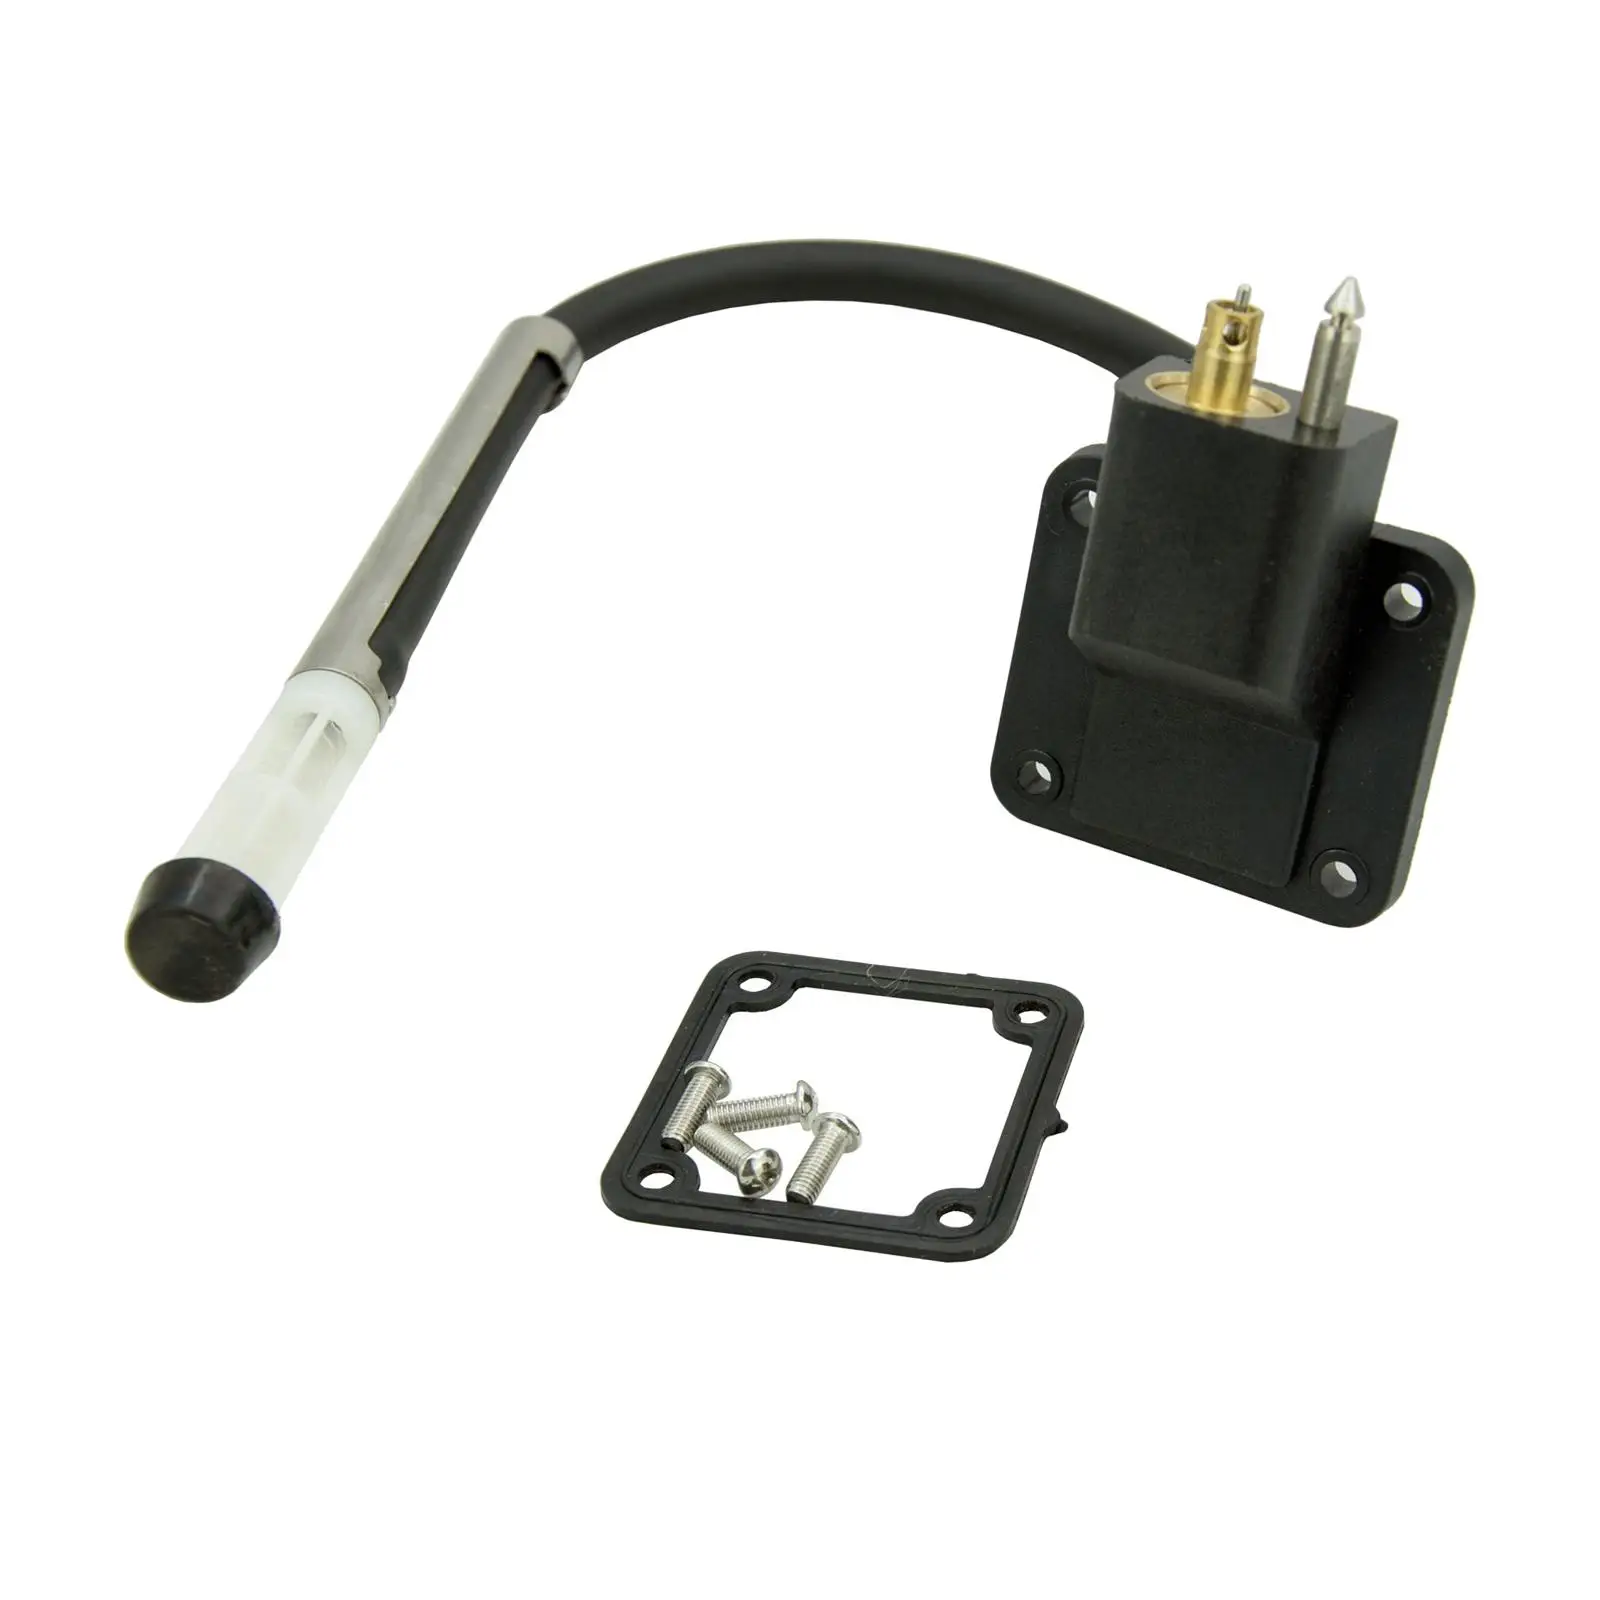 Fuel Tank Connector Fitting with Fuel Meter for Outboard Engine Installation Durable